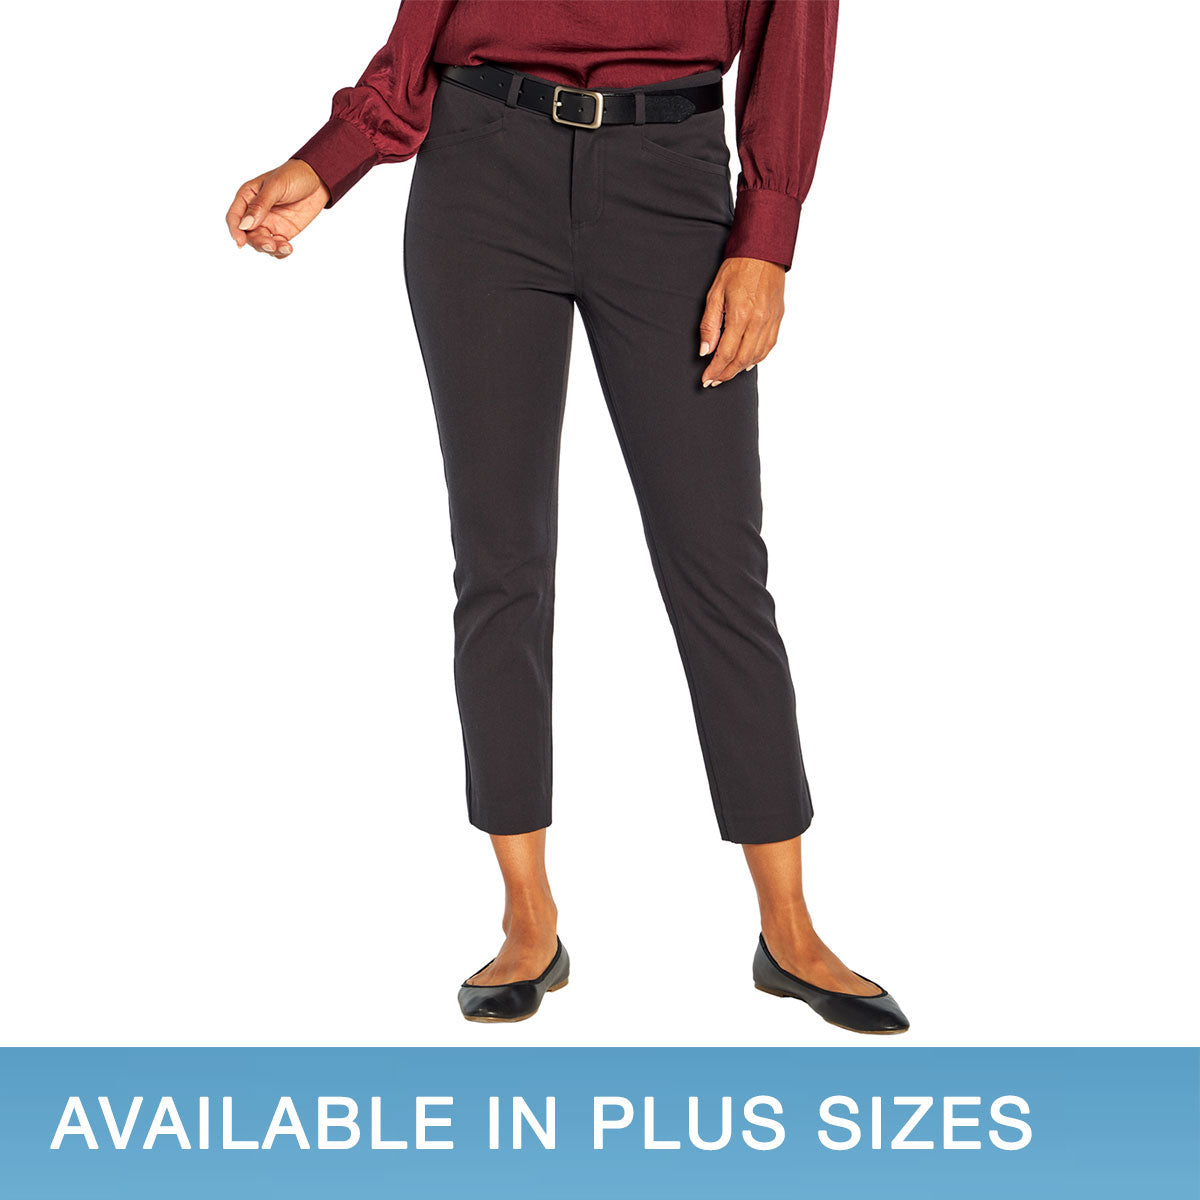 Just My Size Women's Plus-SizeFrench Terry Capri with Pockets at